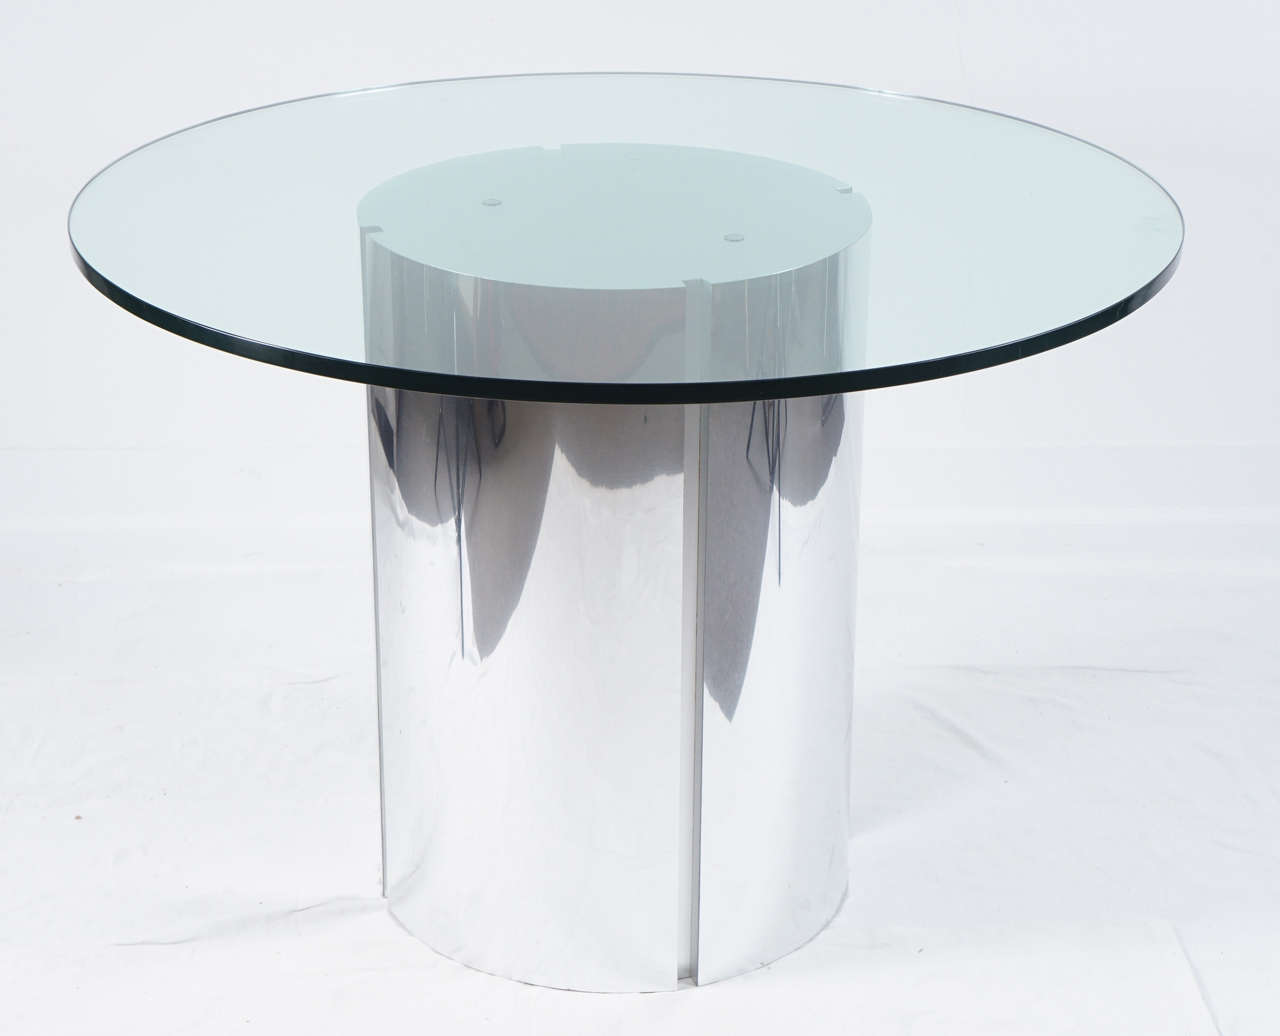 this table can be used for any needs you have.
perfect size for kitchen or small dining area.
table is in wonderful condition for its age, with light surface scratching to top of chrome base.